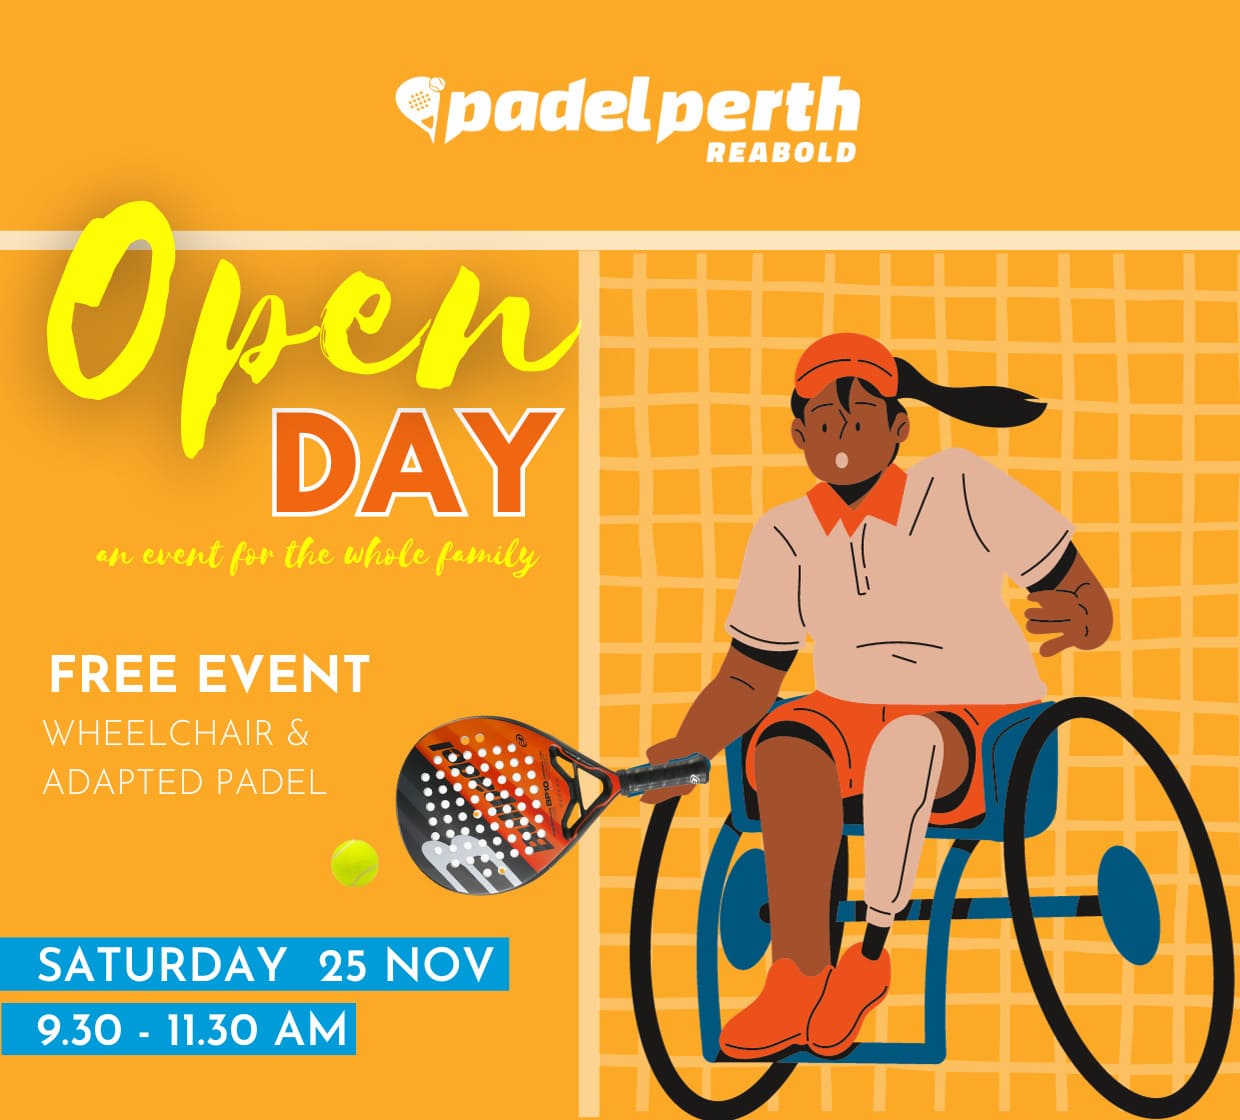 Padel Perth Open Day Free Event